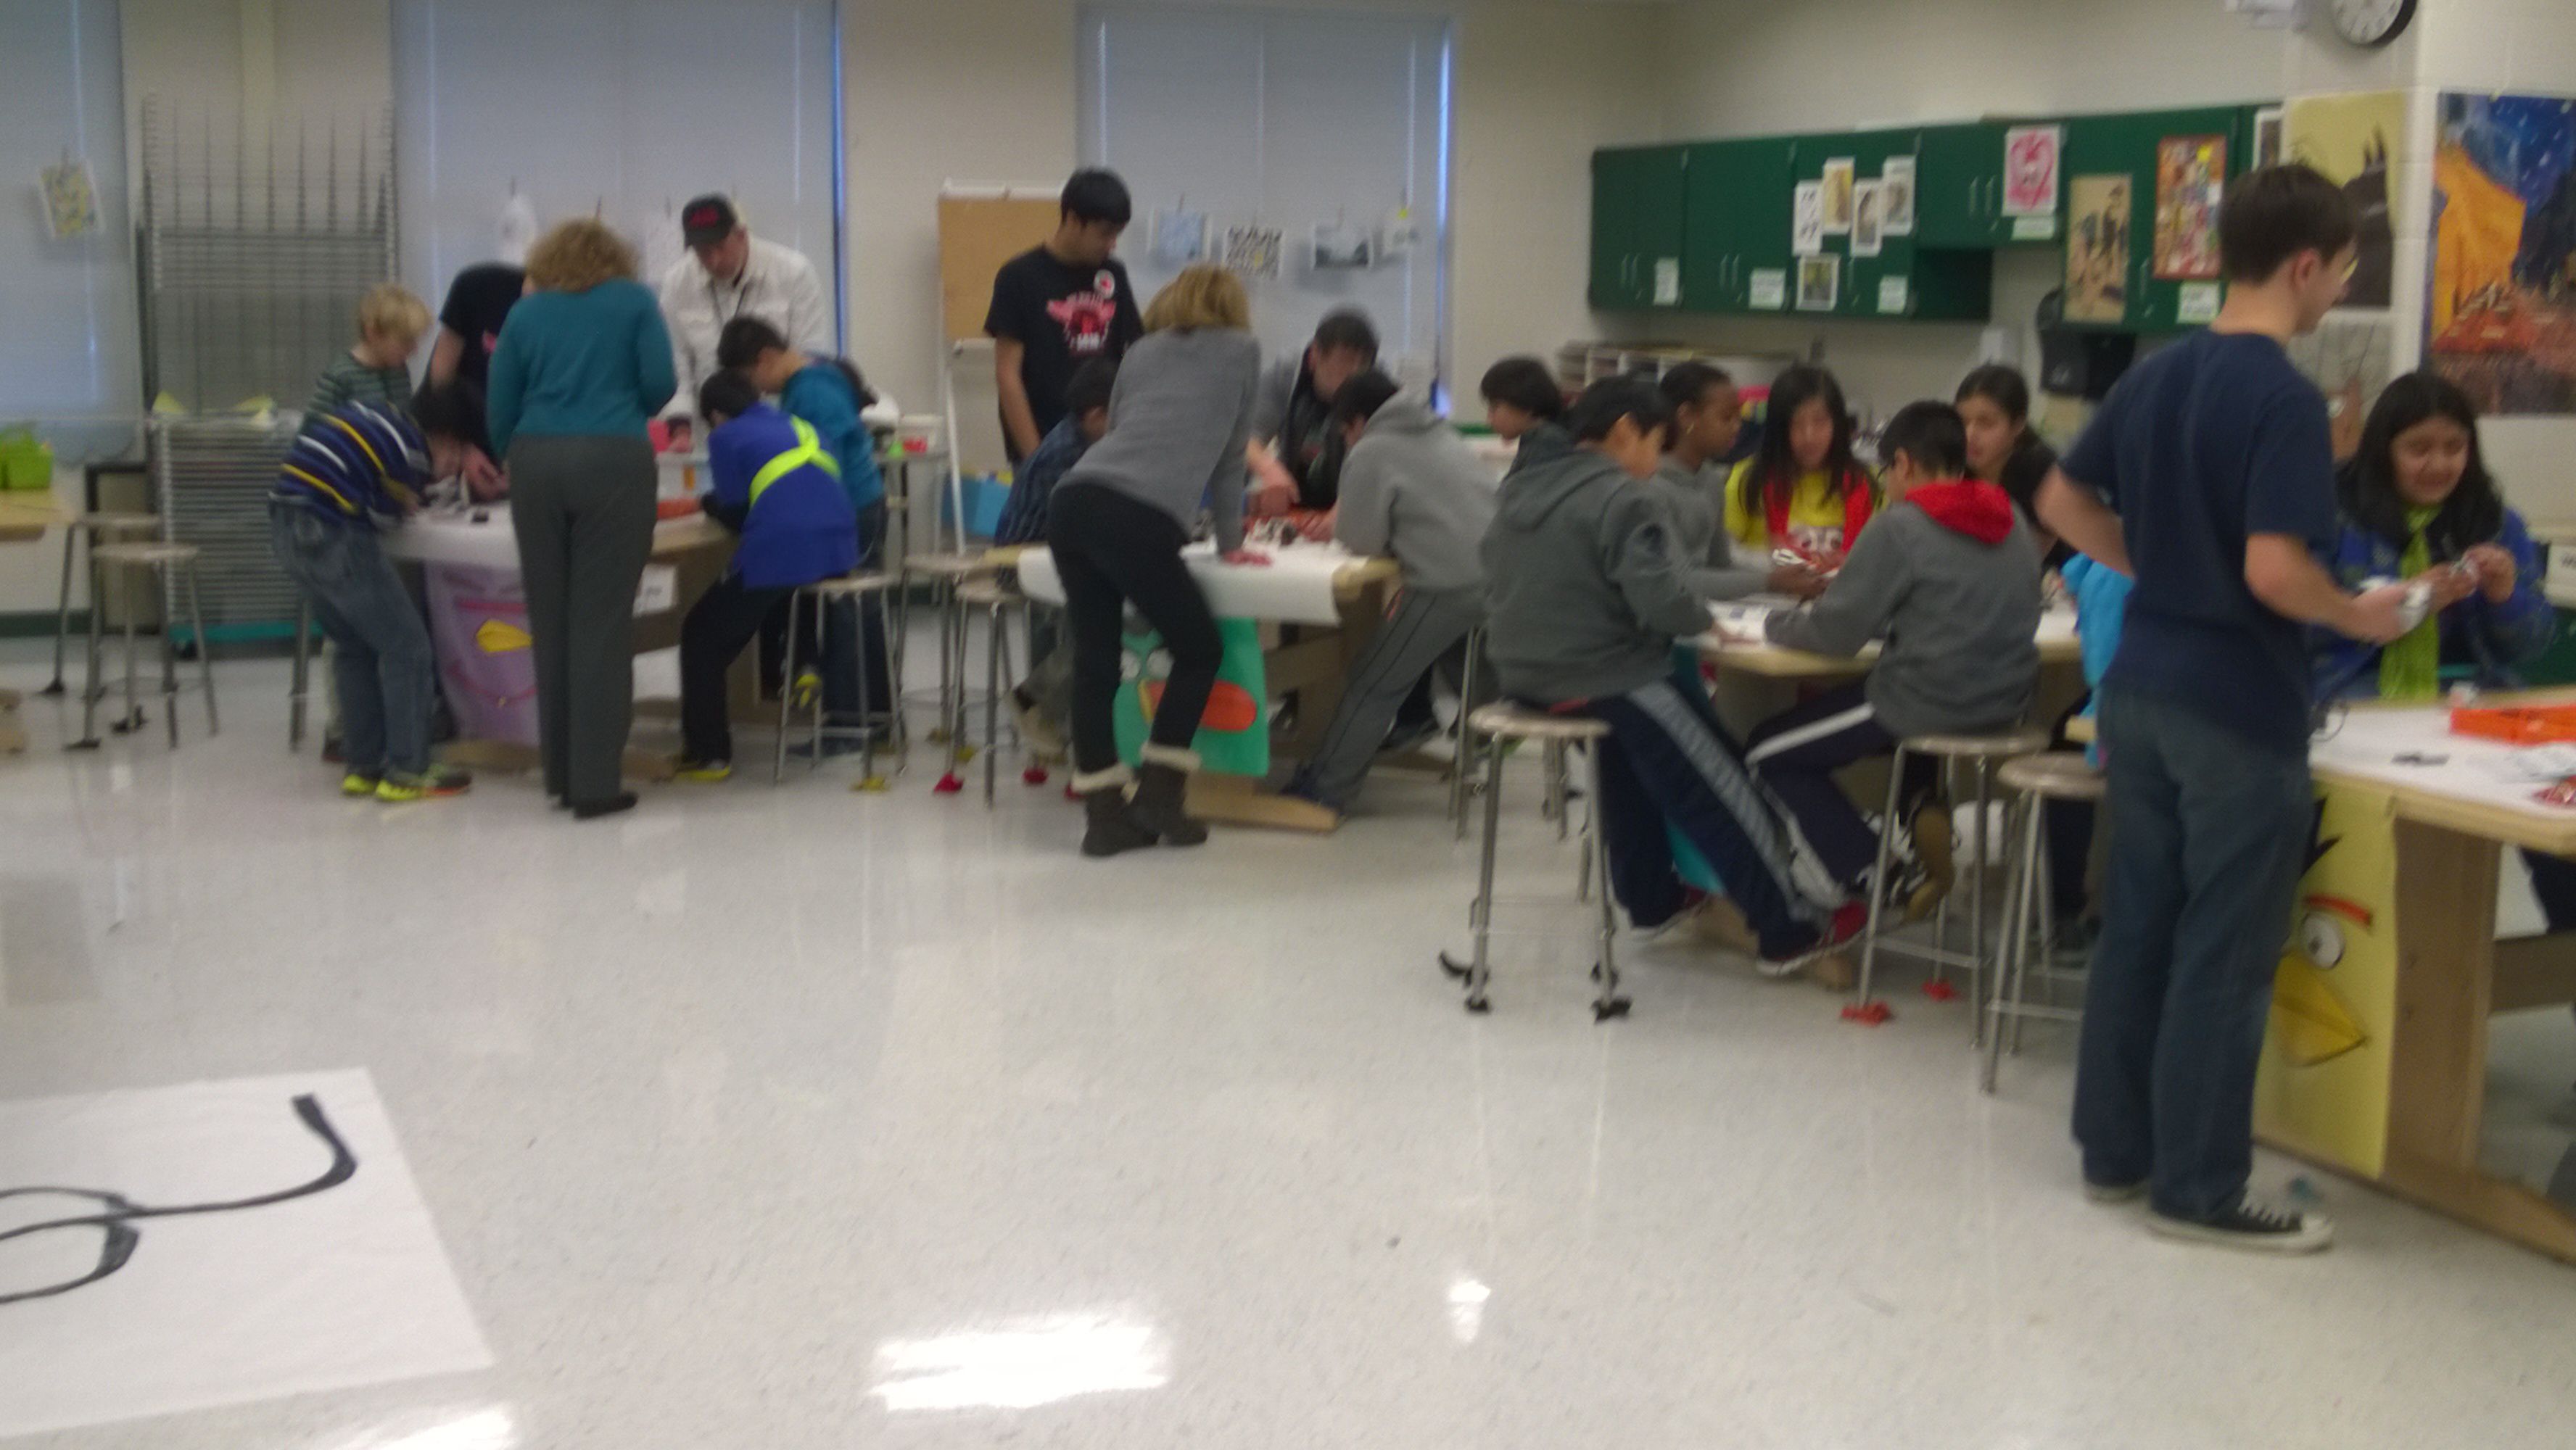 A clean room with tables, where team members and children are building robots.